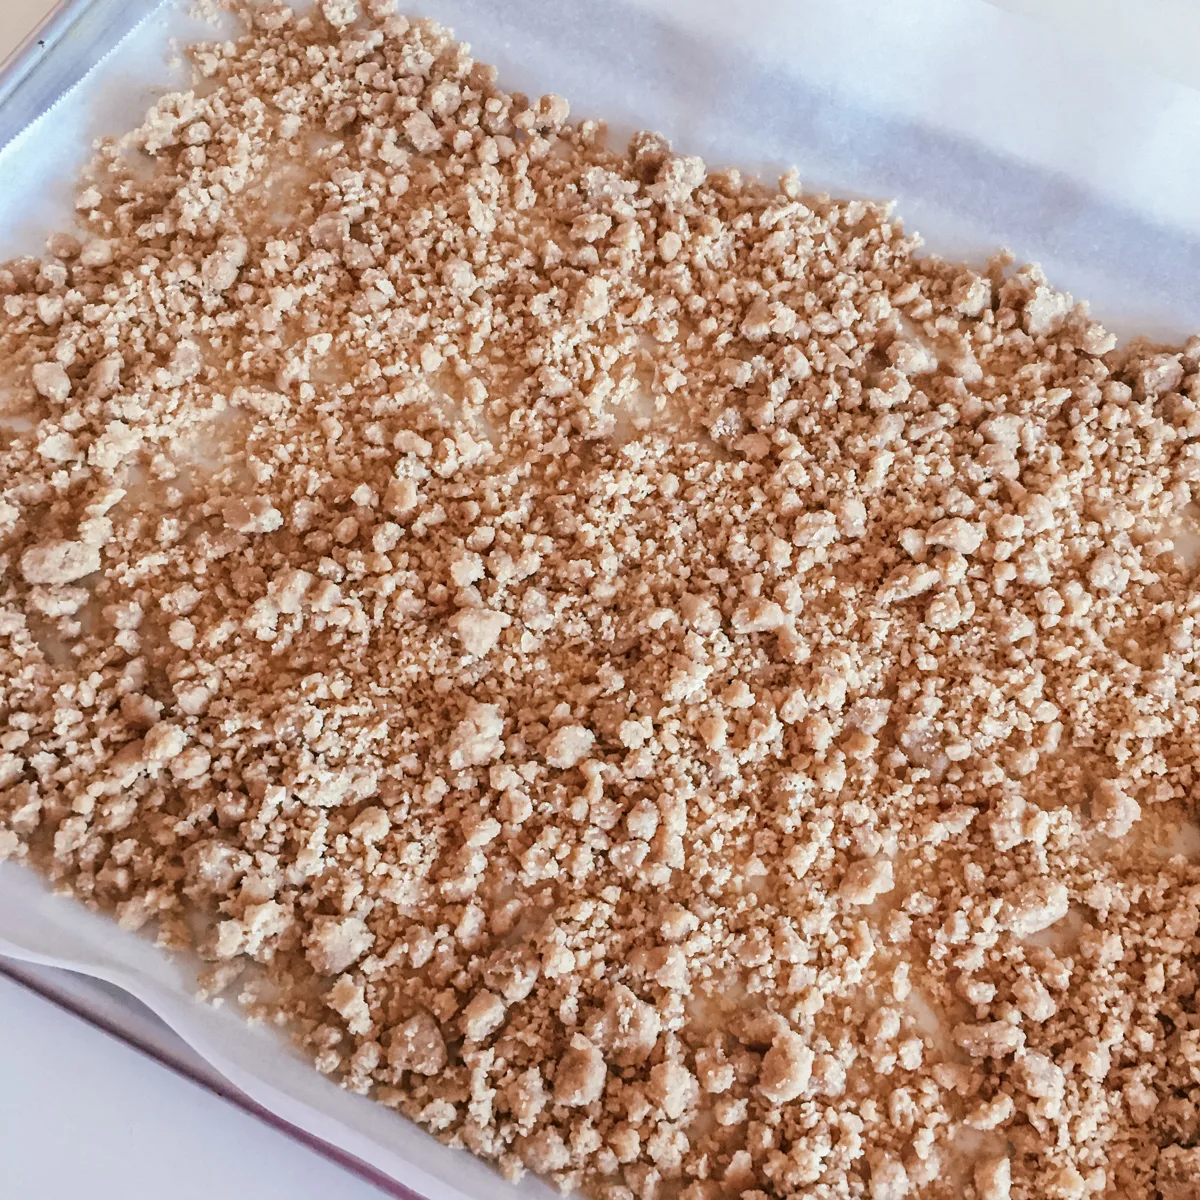 cinnamon crumb topping for muffins on a baking sheet